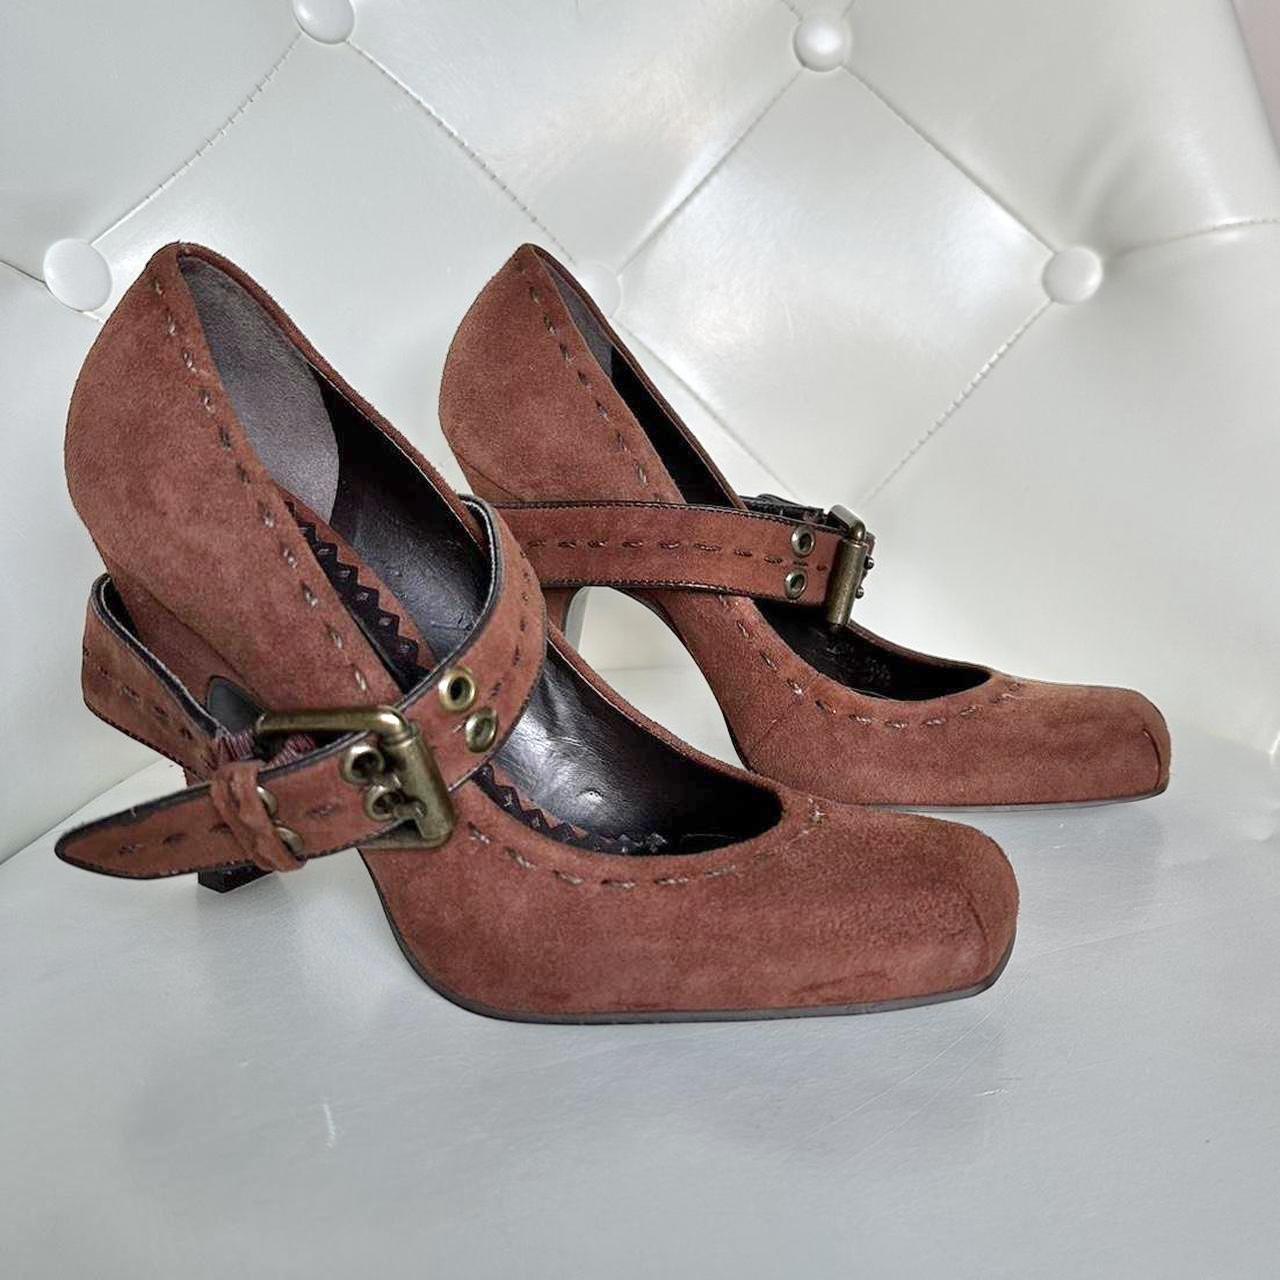 Vince Camuto Women's Brown Courts